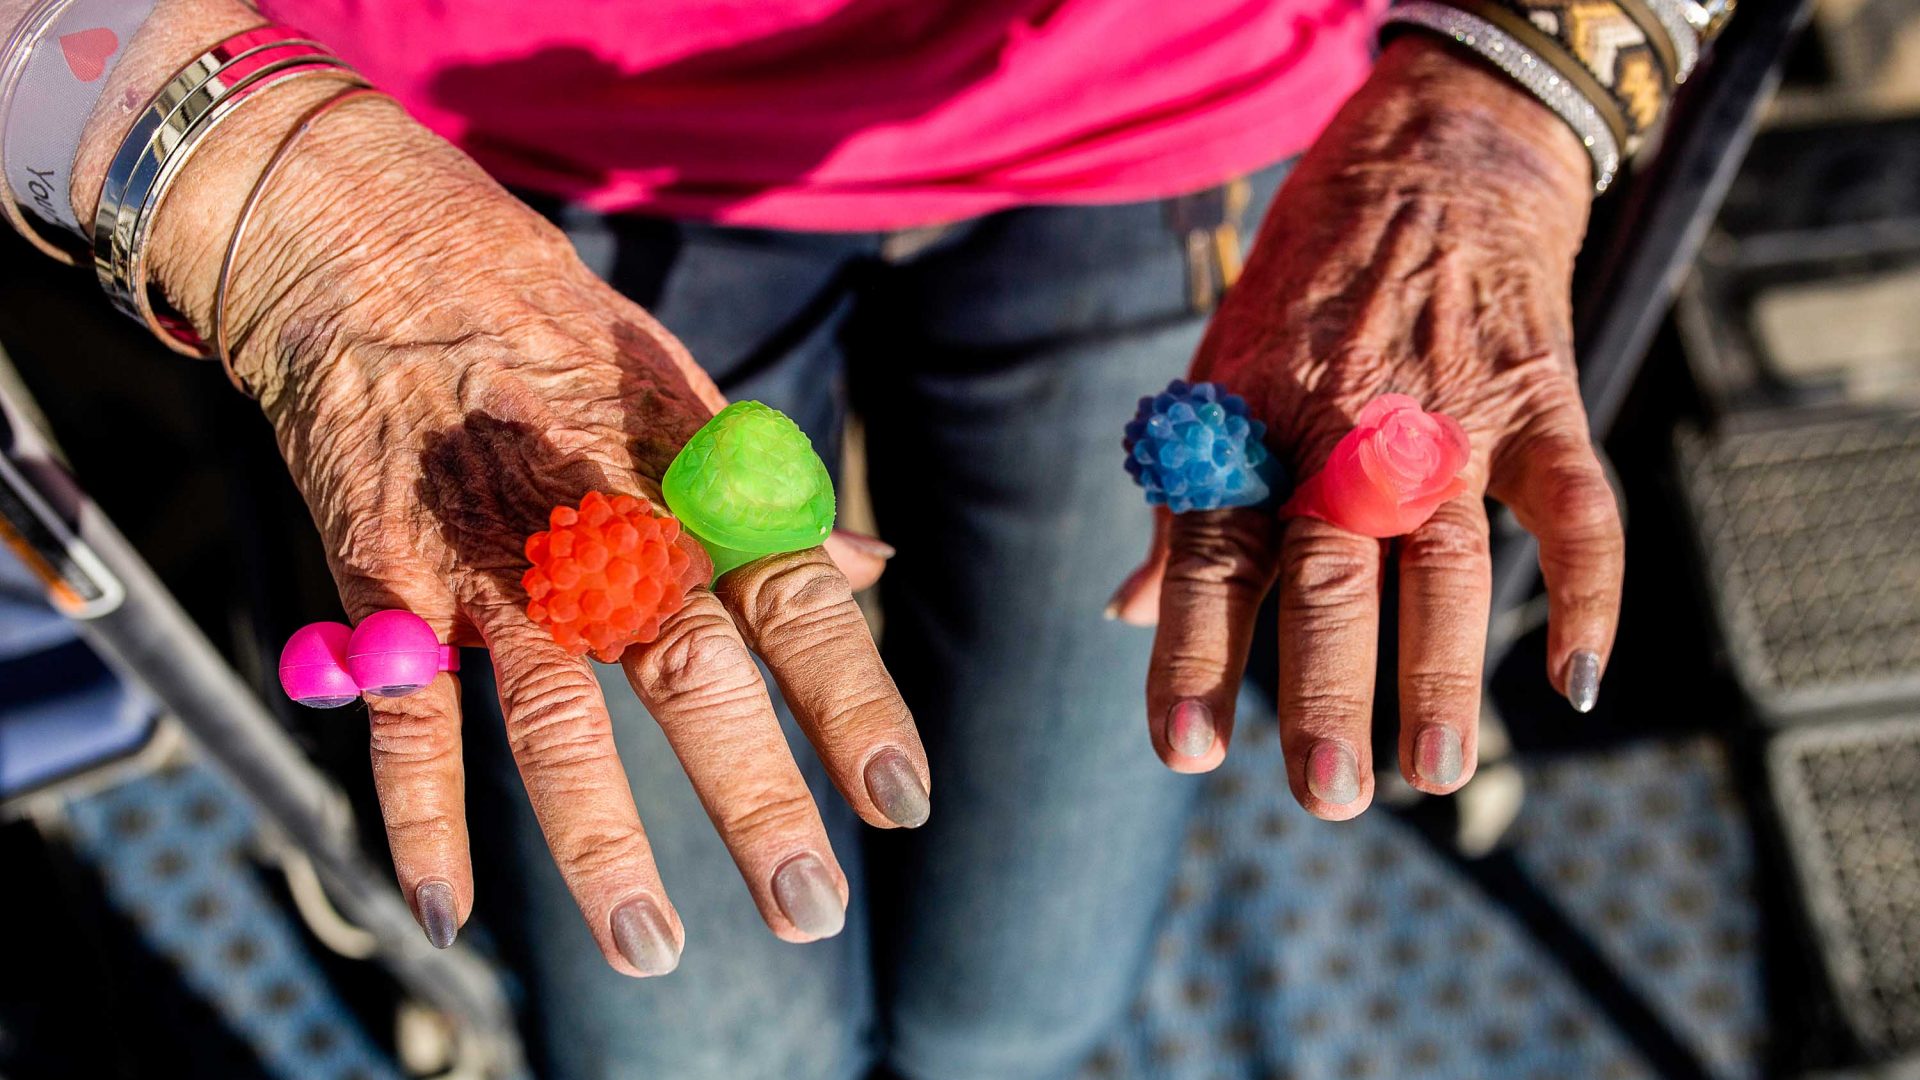 Carolyn Monroe, 81, shows off the rings she got at Burning Man. She plans to wear them to her next chemo treatment.